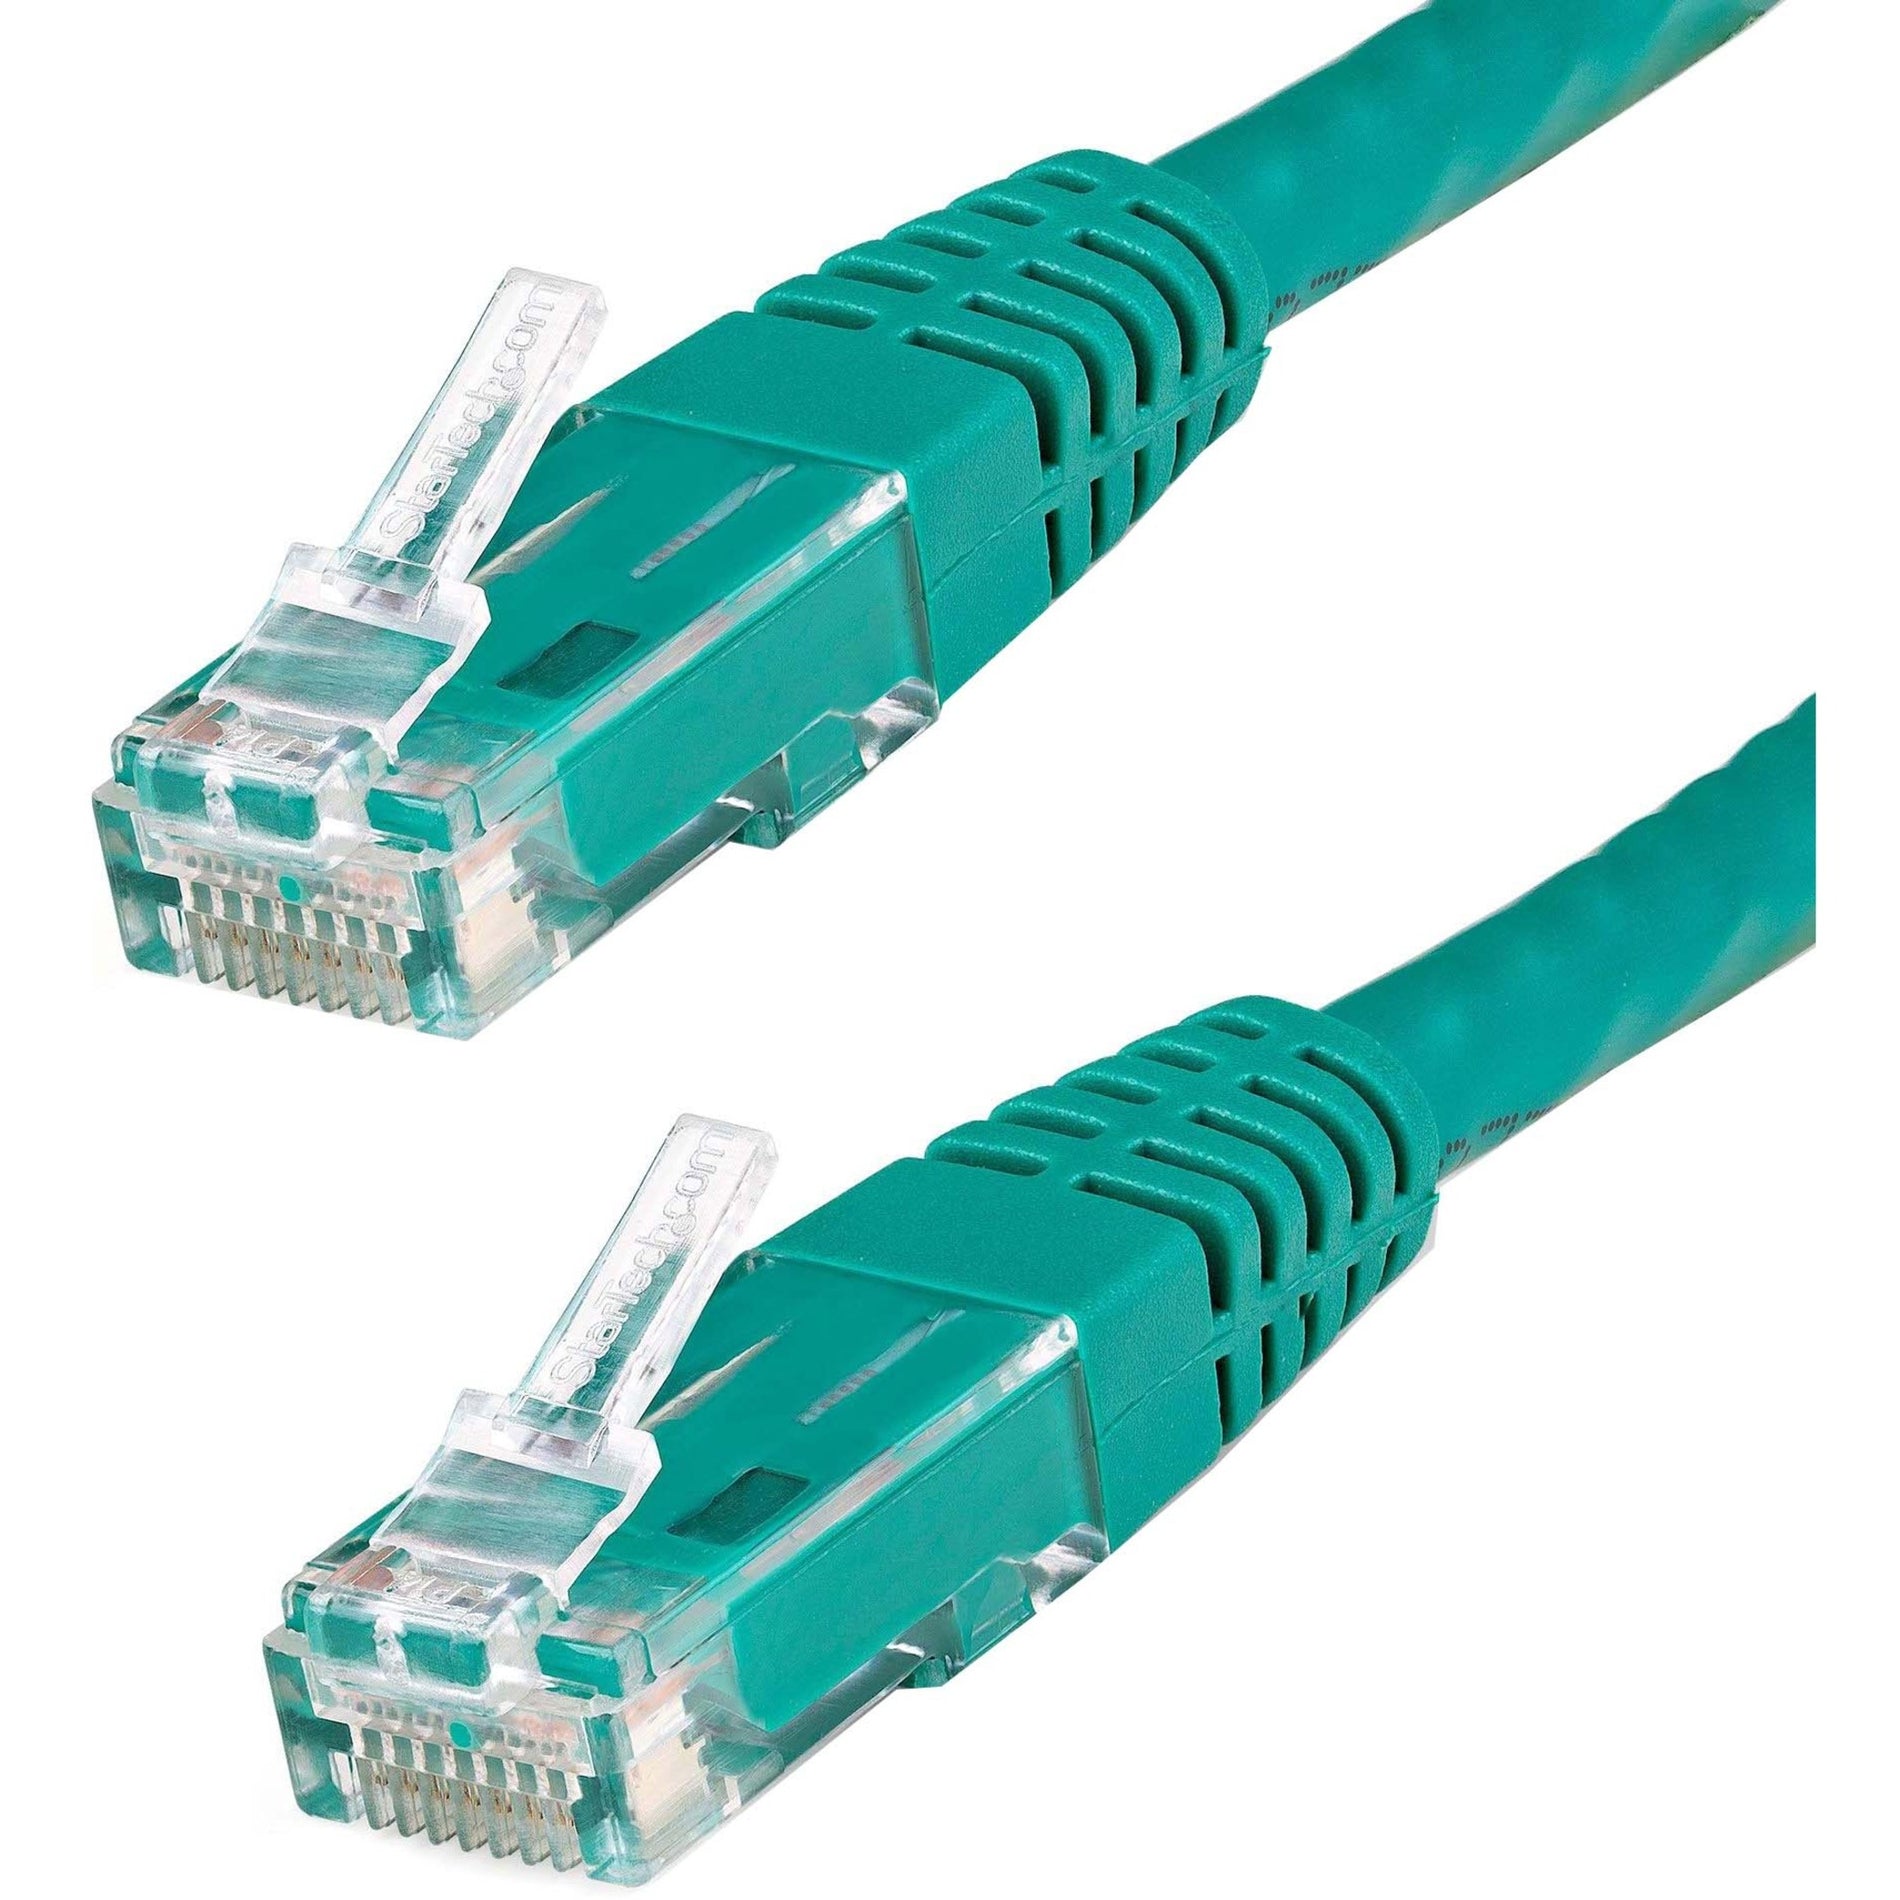 StarTech.com スタートレック・ドットコム  C6PATCH4GN 4ft Green Cat6 UTP Patch Cable C6PATCH4GN 4フィート グリーン Cat6 UTP パッチケーブル  ETL Verified ETL 認証済み  10 Gbit/s Data Transfer Rate 10ギガビット/秒のデータ転送速度  Gold Plated Connectors 金メッキコネクタ